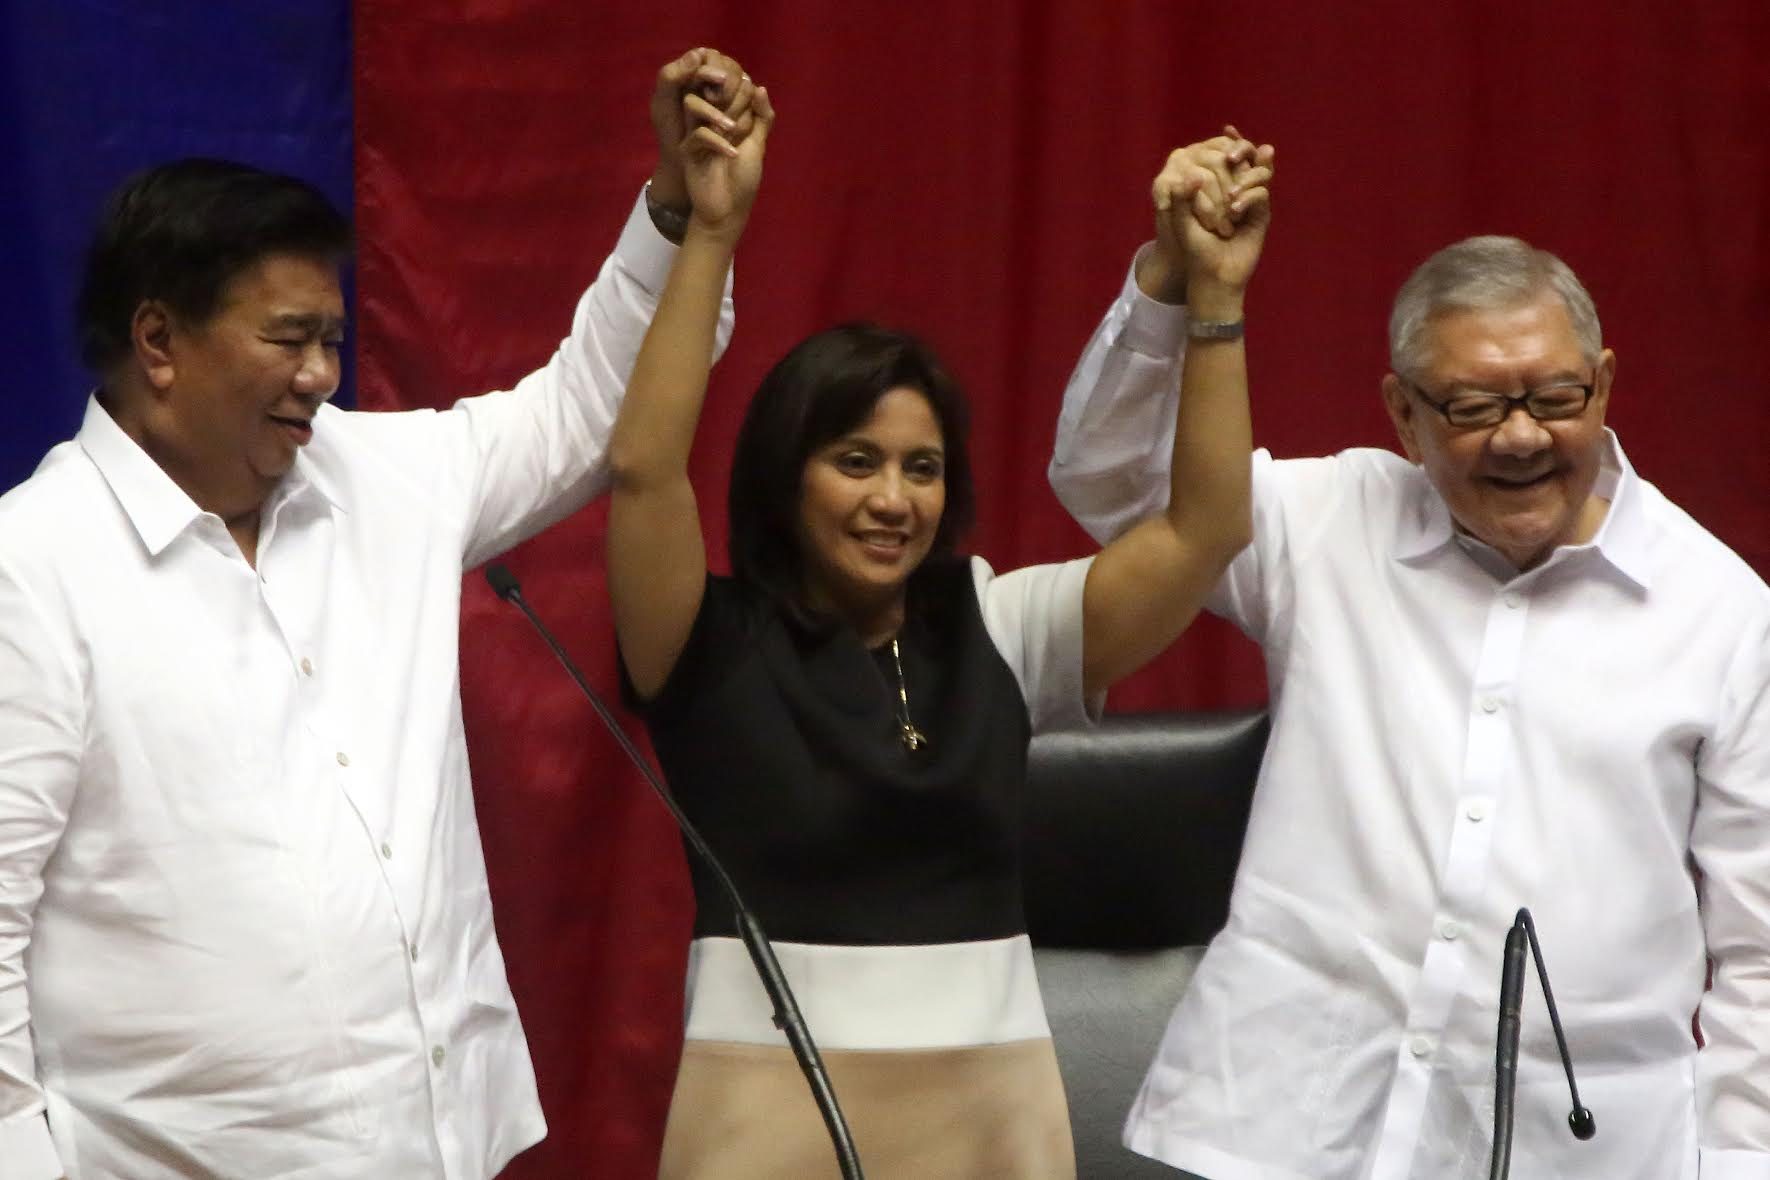 With or without Cabinet post, I’ll fulfill duty as VP – Robredo